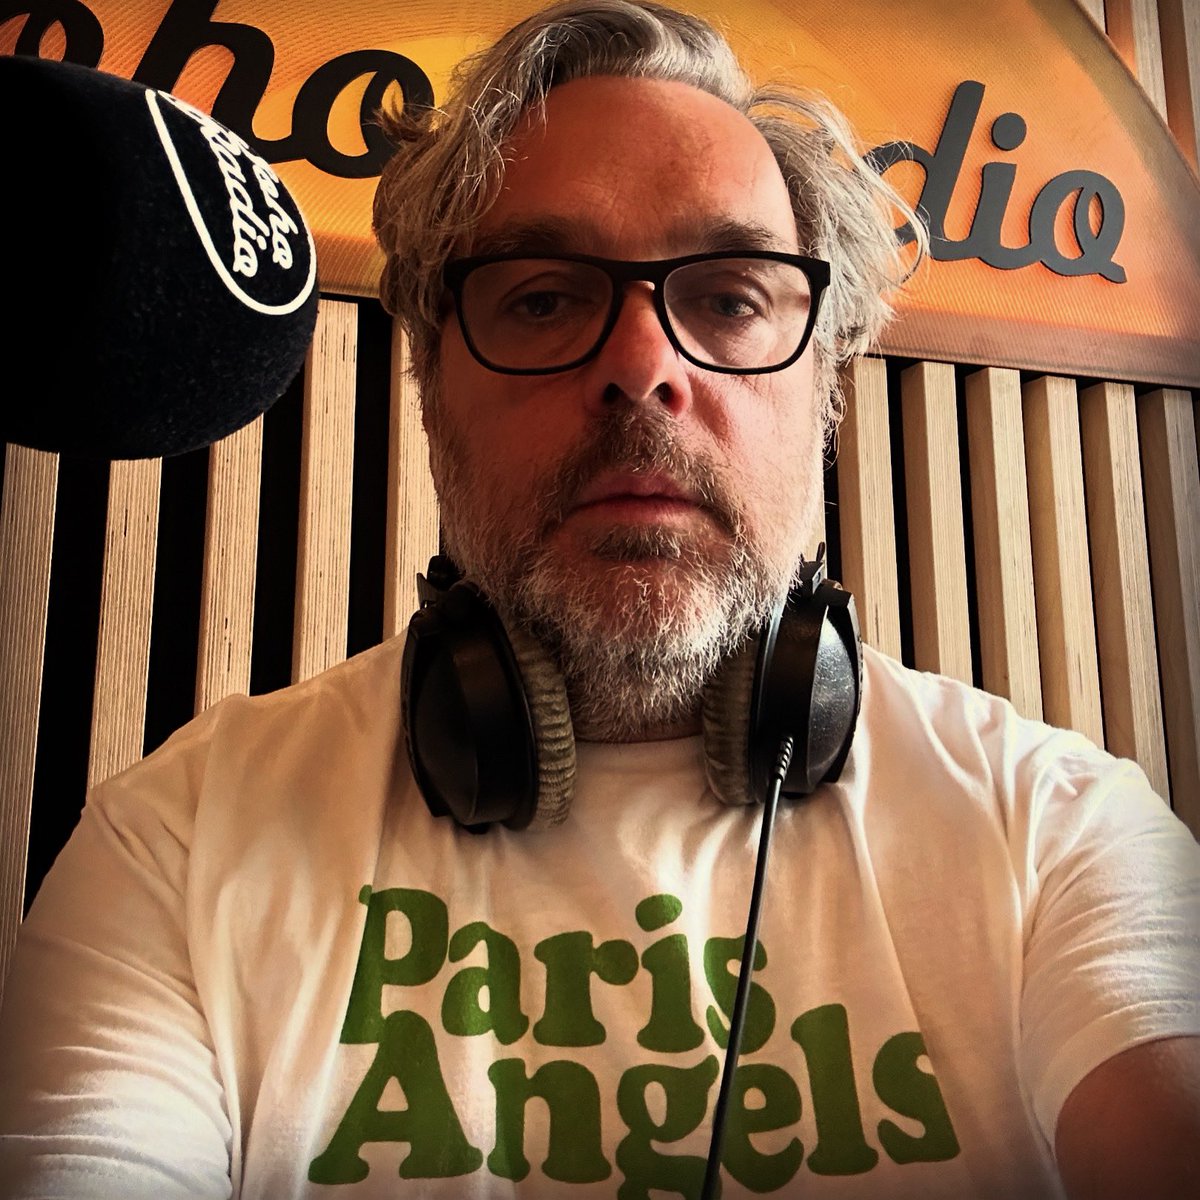 Recorded a new show for @sohoradio today - two world exclusive first plays, tributes to fallen friends and heroes and a special guest segment from @Moon_Diagrams. It goes out on Friday night at 6pm!